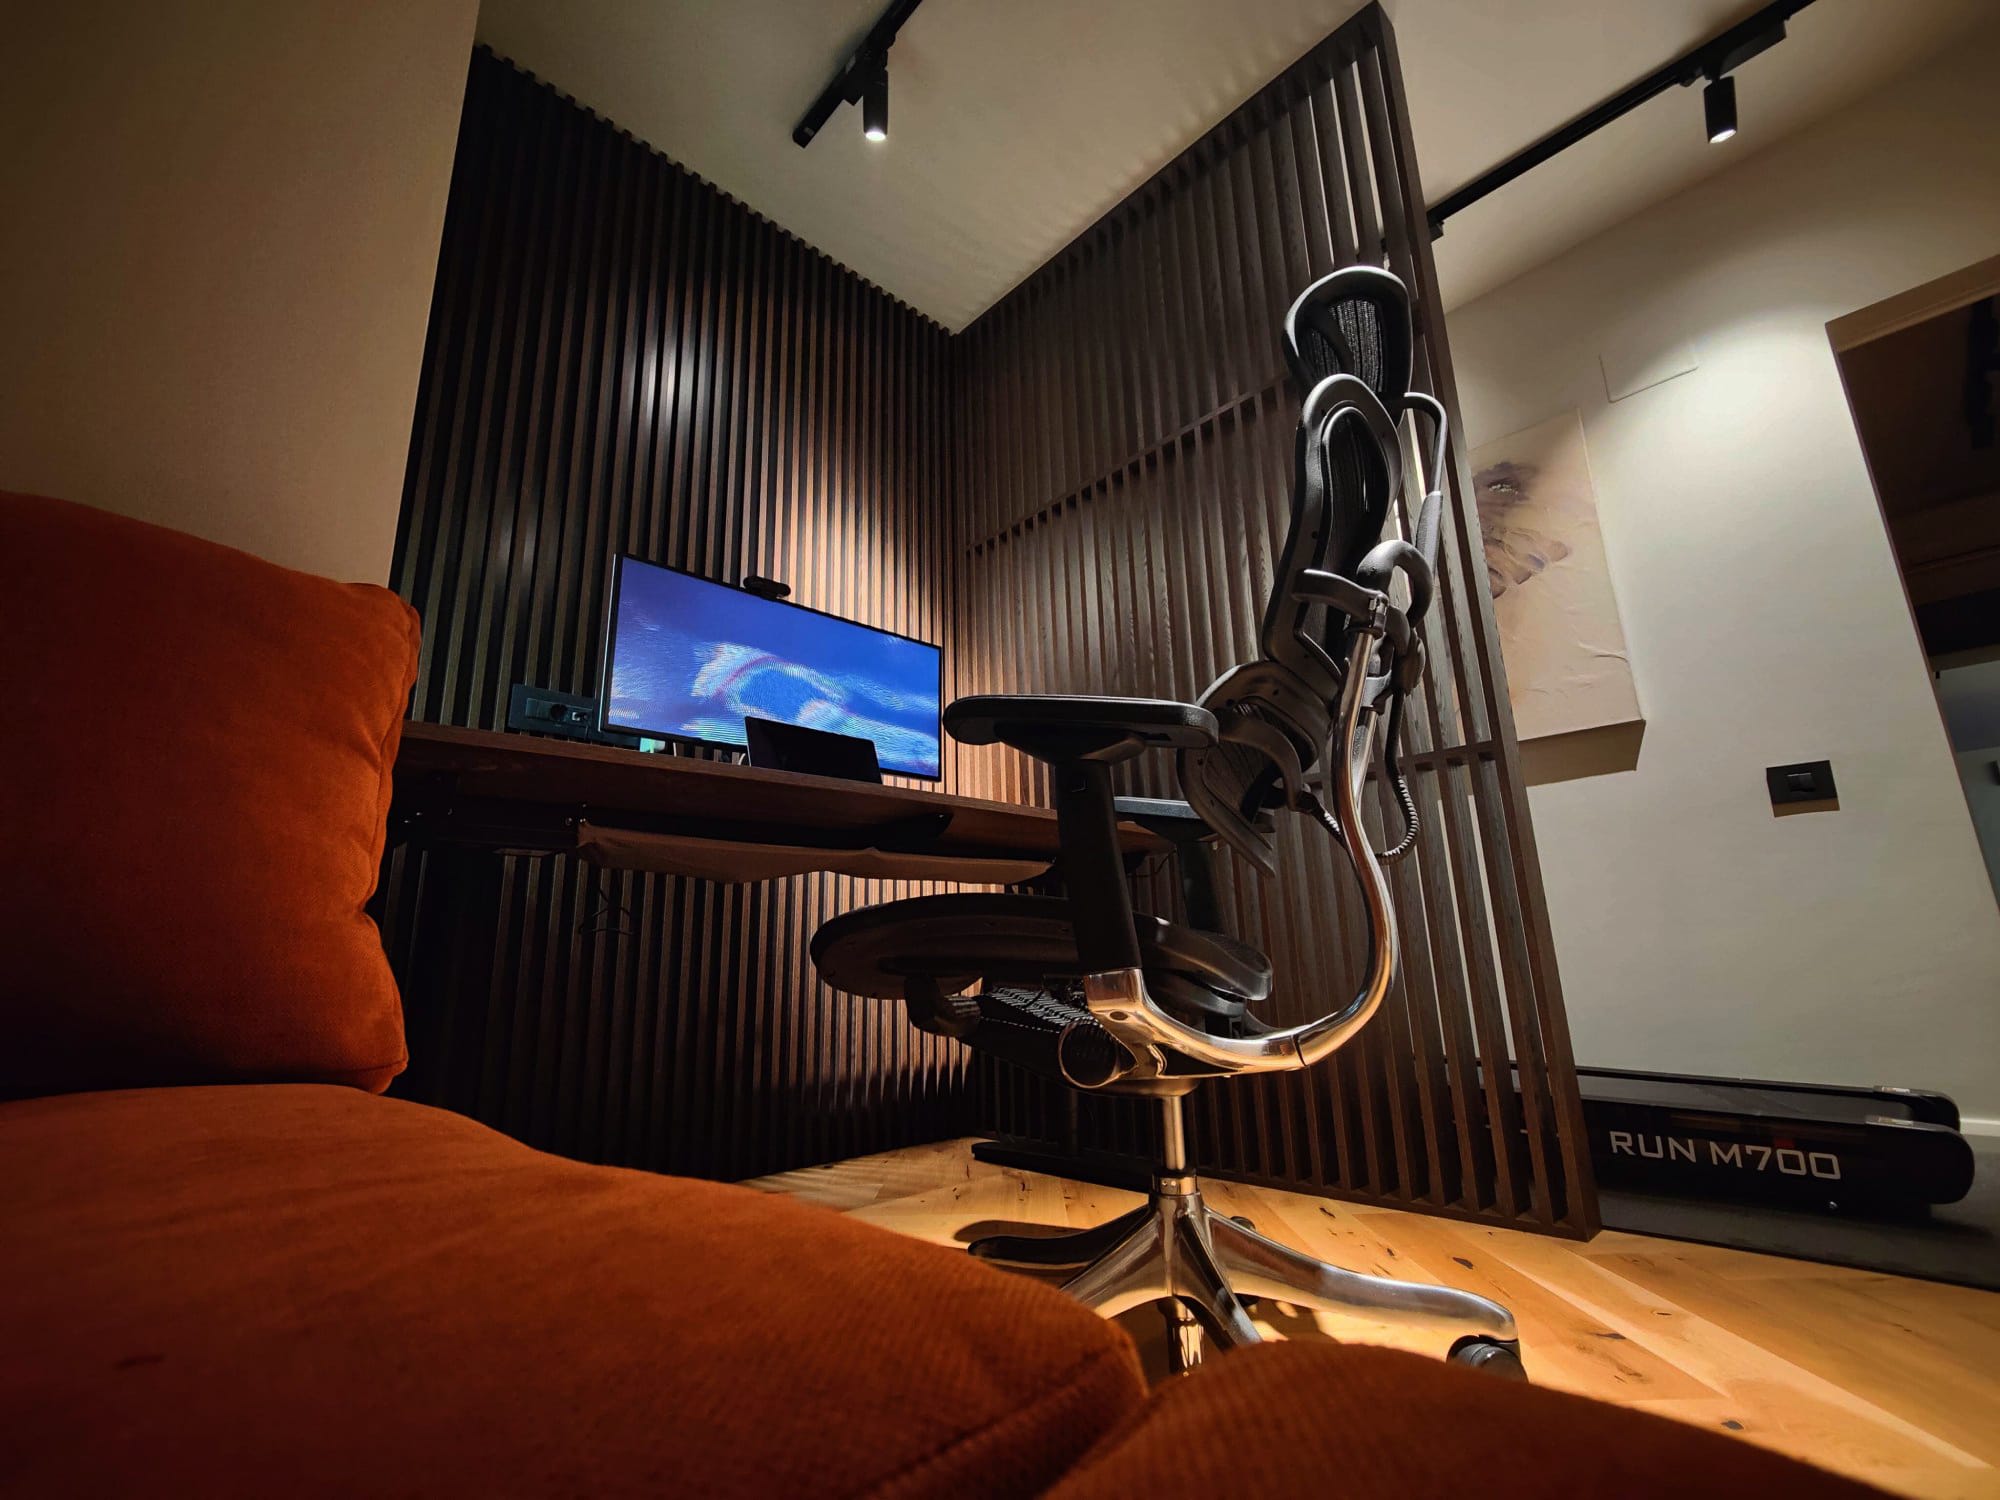 A stylish slatted wall home office setup with an ergonomic office chair in the foreground, a desk with a monitor displaying an abstract scene, and ambient lighting creating a warm and inviting atmosphere